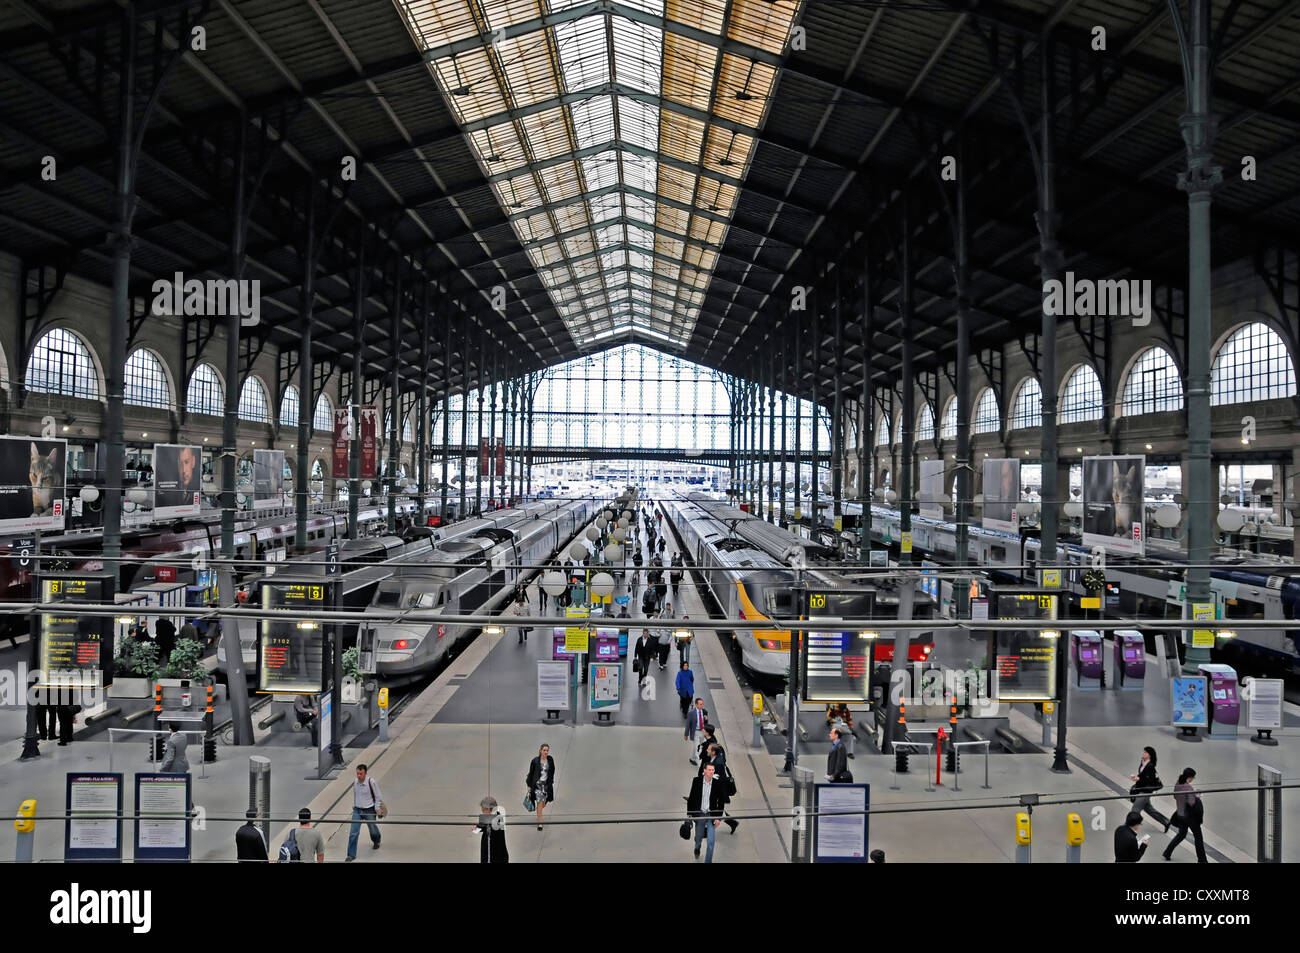 Station hall, Gare du Nord train station, north station, Paris, France, Europe Stock Photo